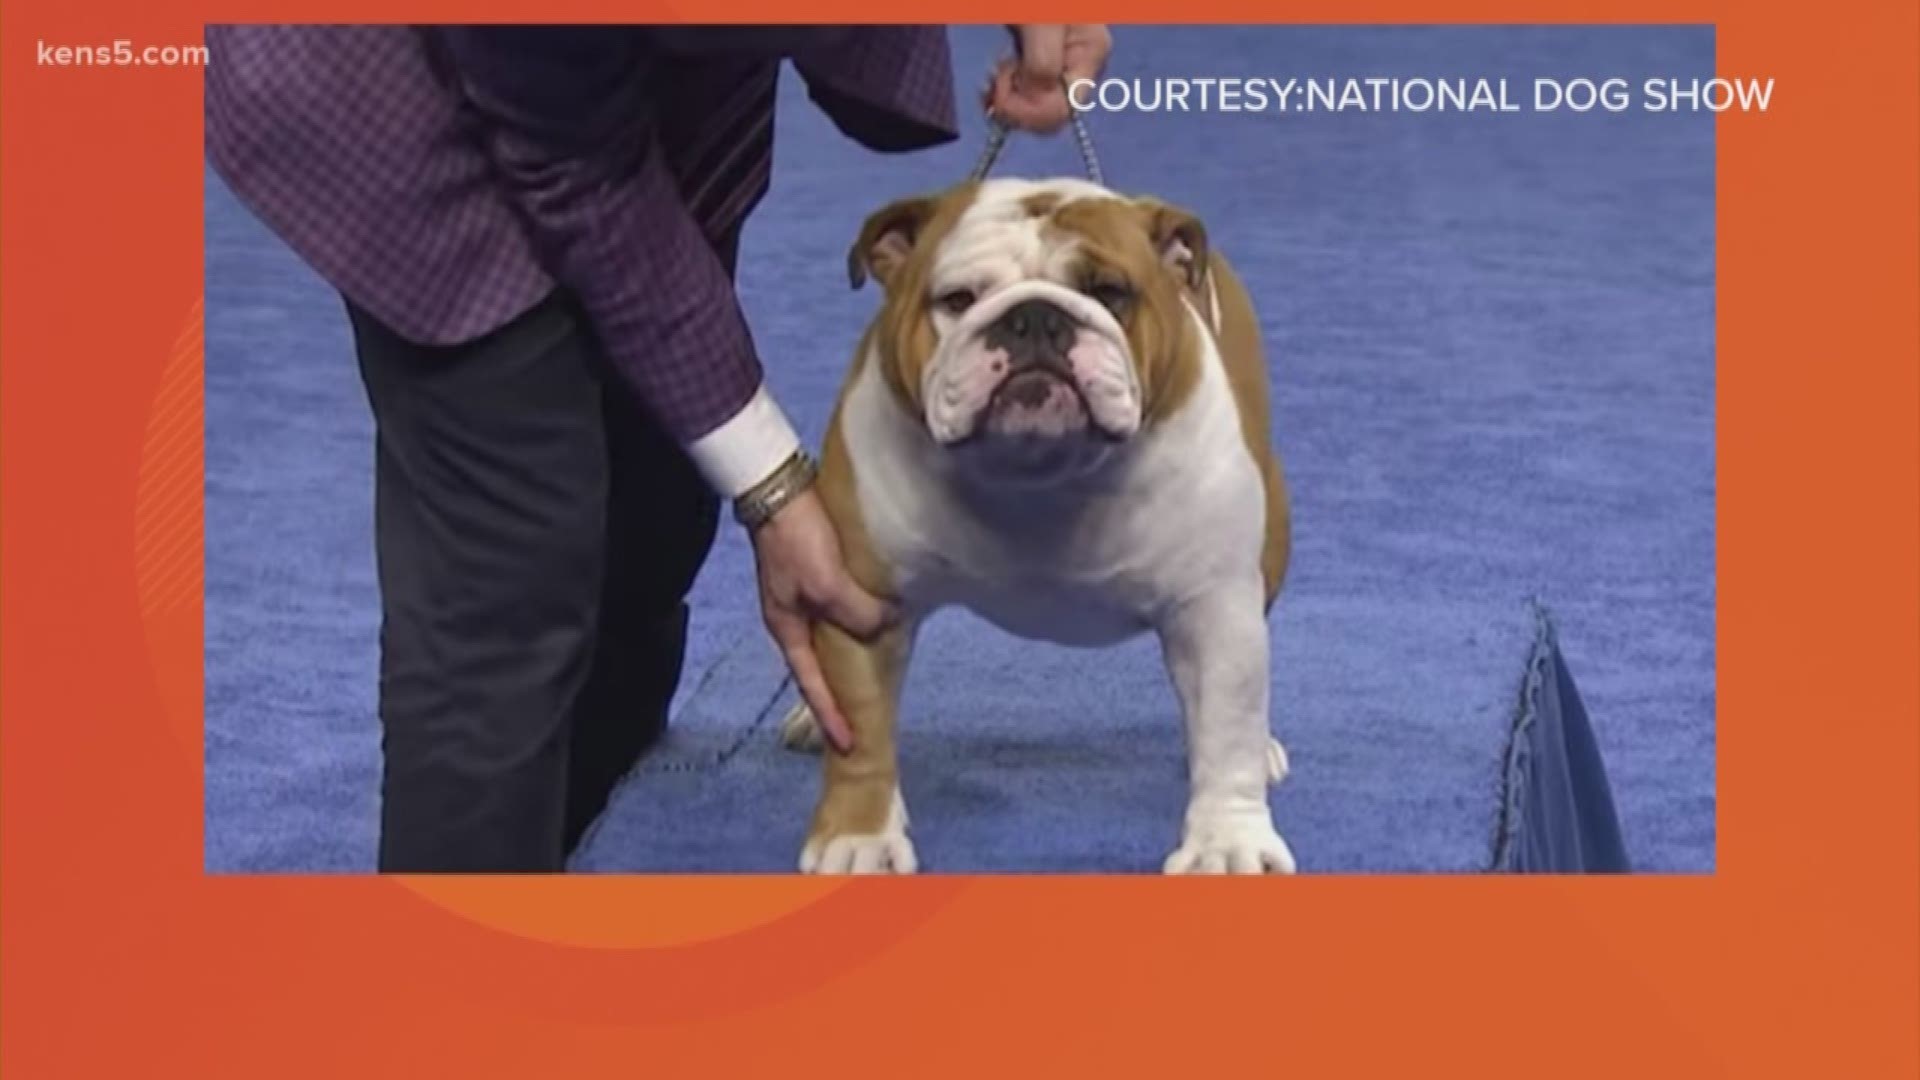 Meet the handsome little guy who took home the gold in the 2019 National Dog Show!